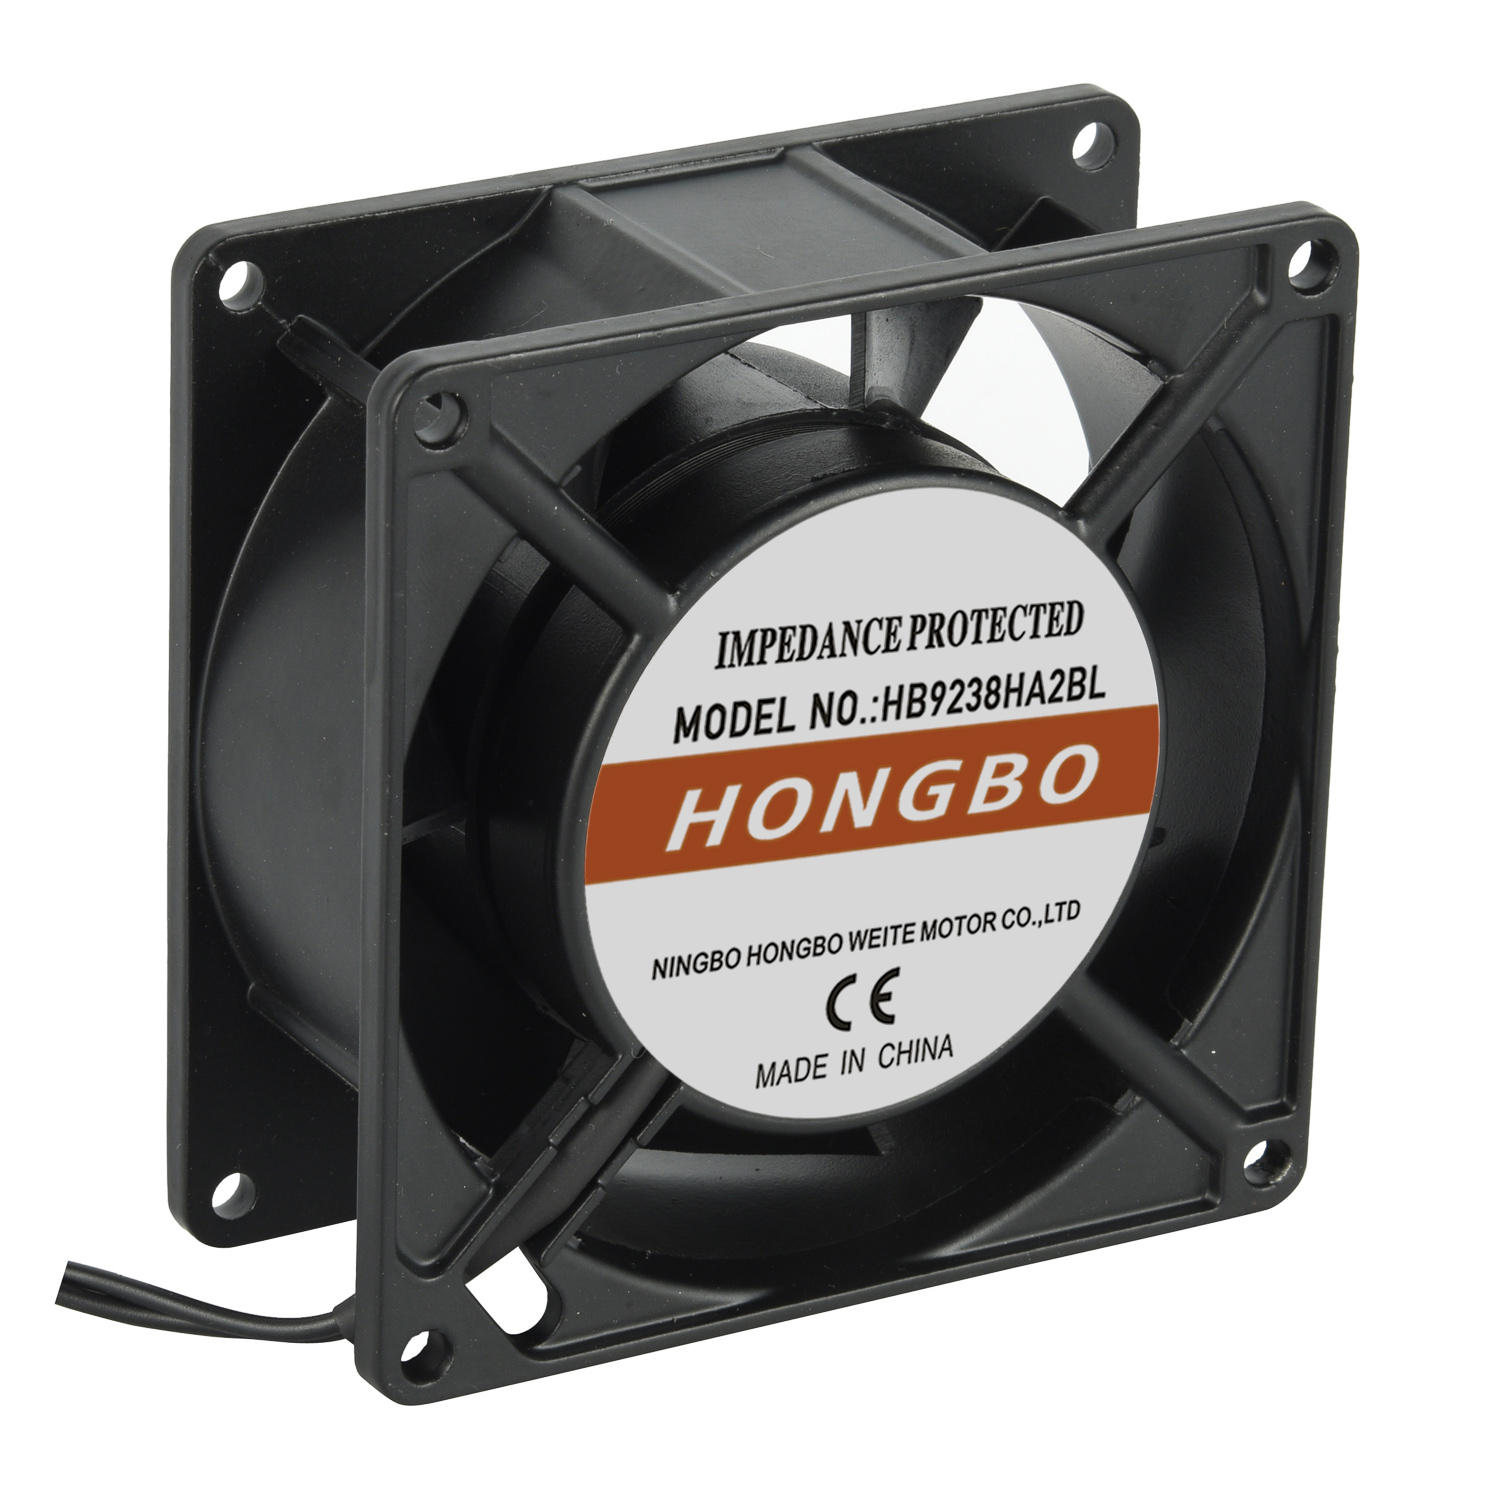 Robust 92mm*92mm*38mm High-Performance AC 9238 Axial Cooling Fan